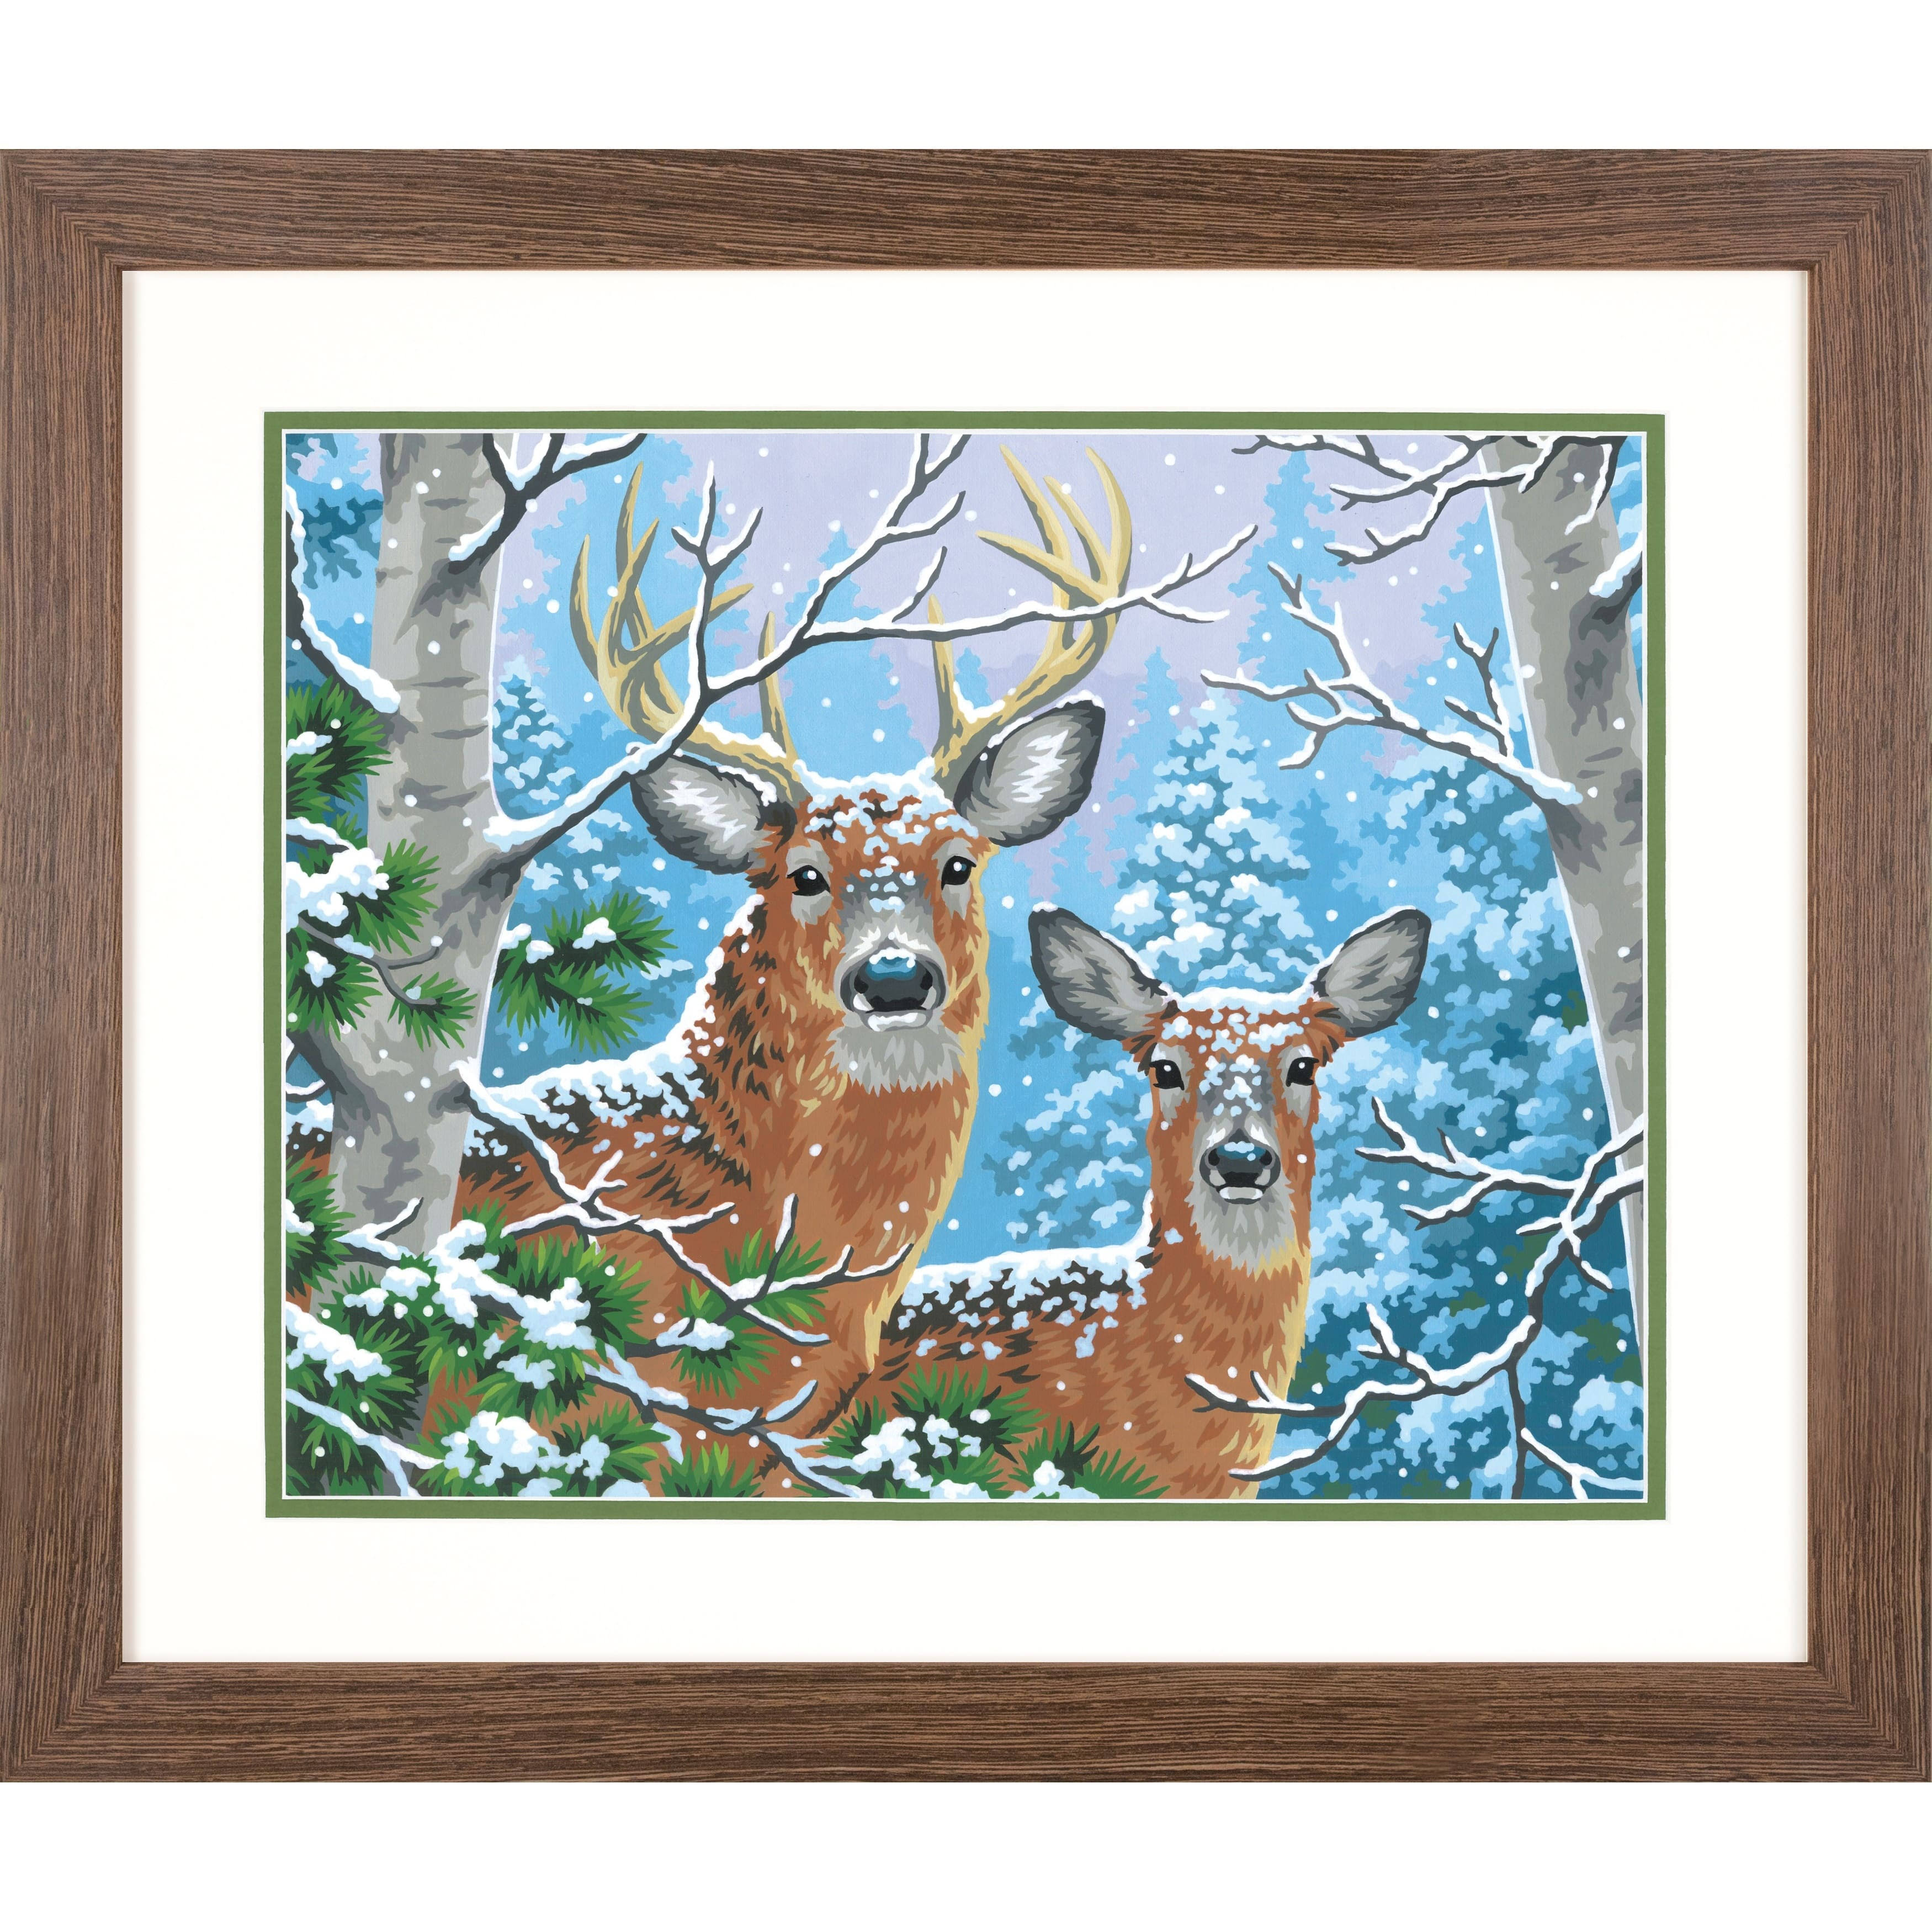 Paint Works Paint by Number Kit 14 inchx11 inch-Whitetail Winter